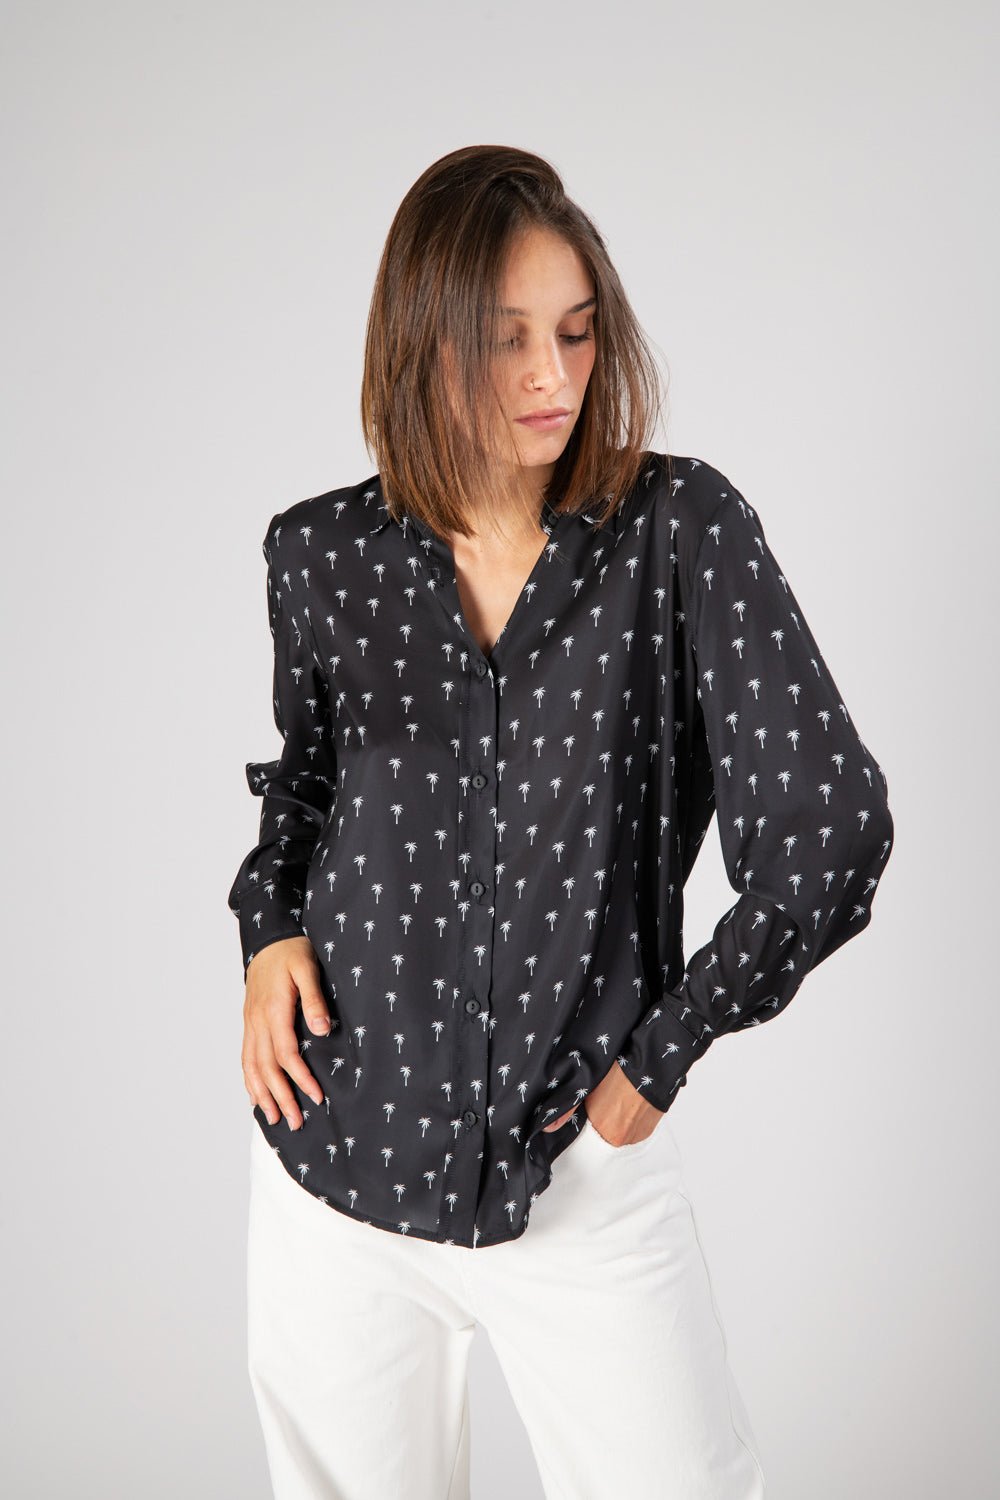 PALMS OVERSIZE SHIRT Oversize woman shirt, allover white palm print. 100% Polyester HTC LOS ANGELES